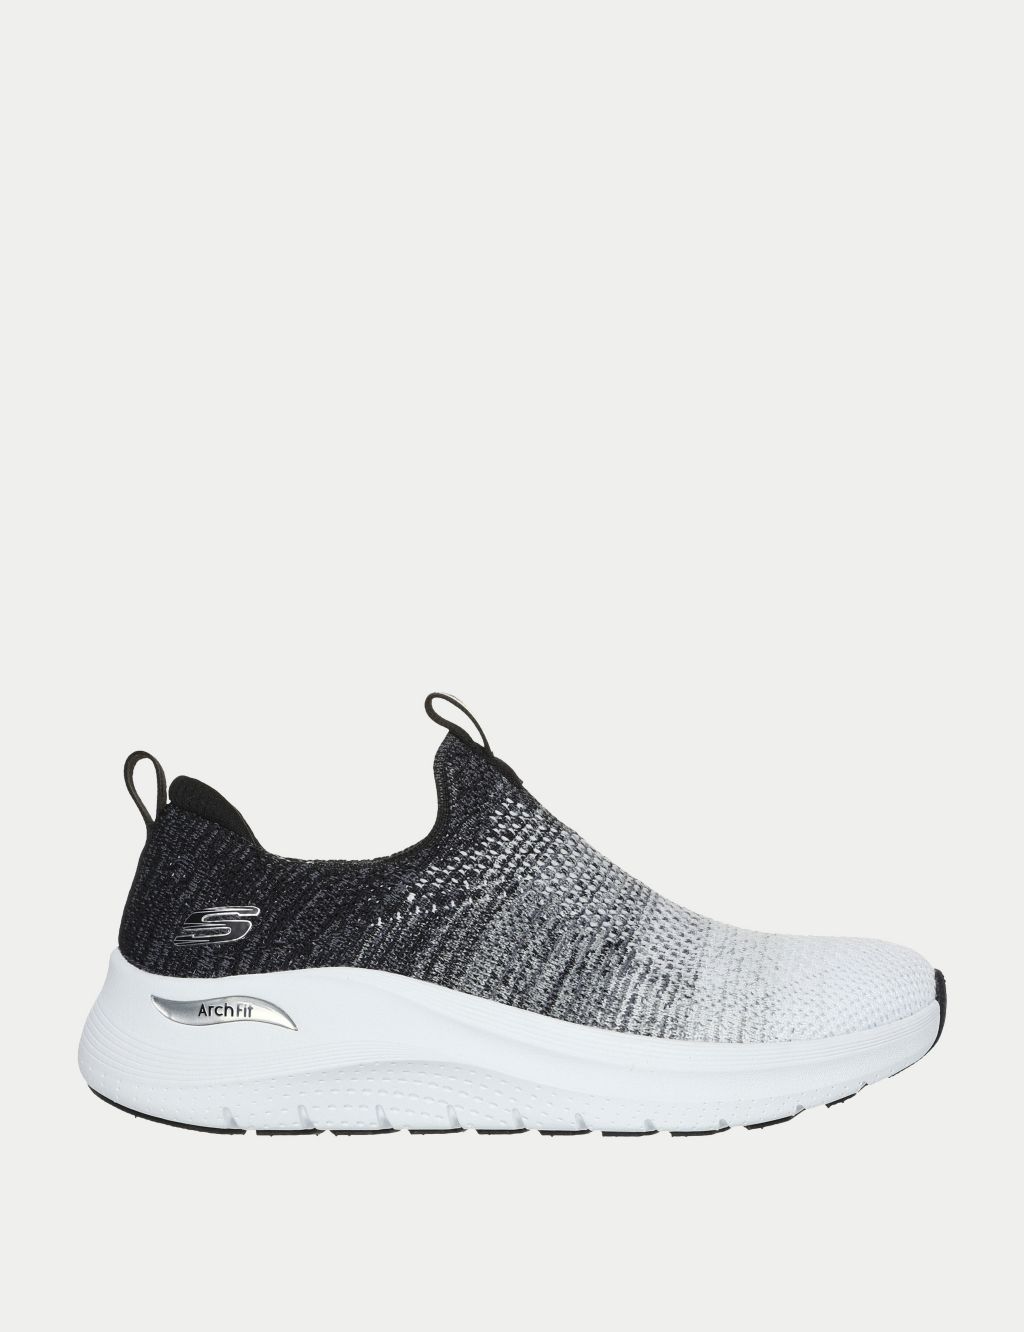 Arch Fit 2.0 Slip On Trainers image 1